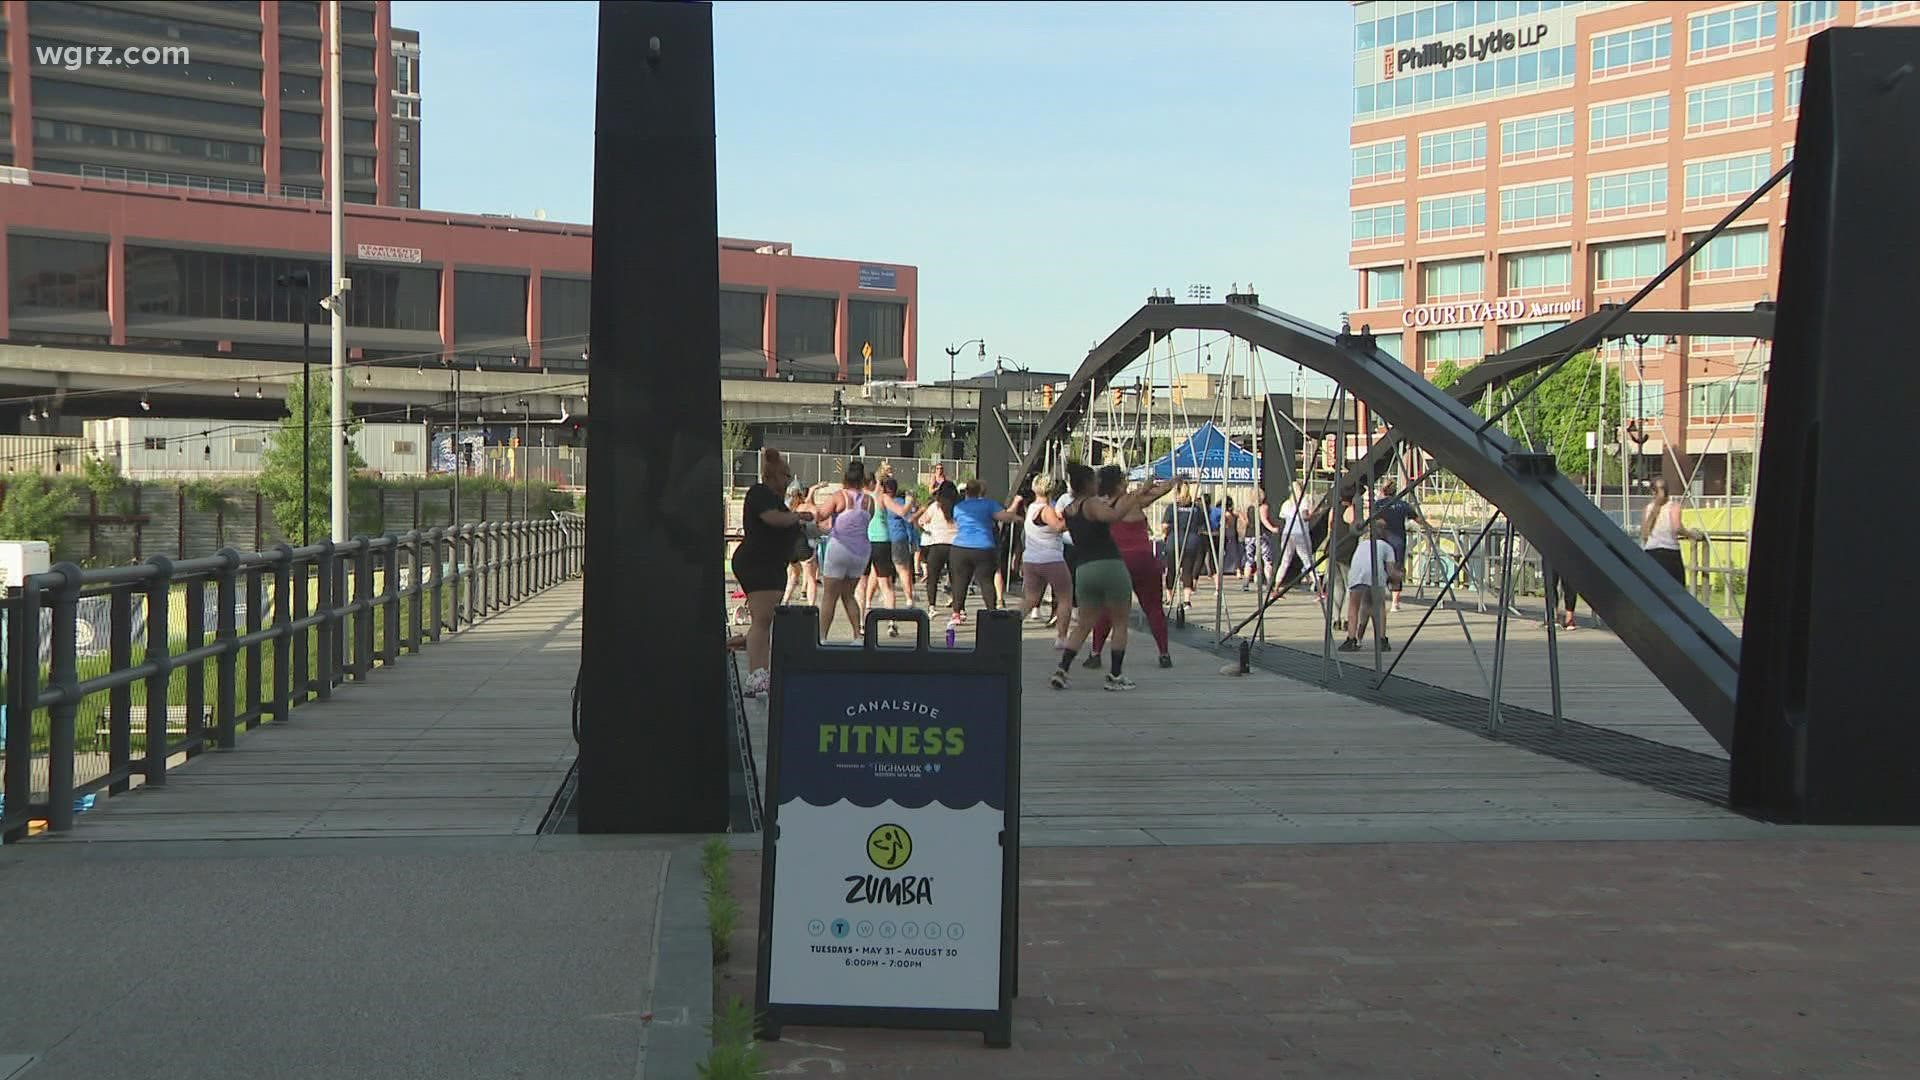 Zumba is one of many free fitness classes offered daily through Labor Day as part of The Fitness at Canalside Program.